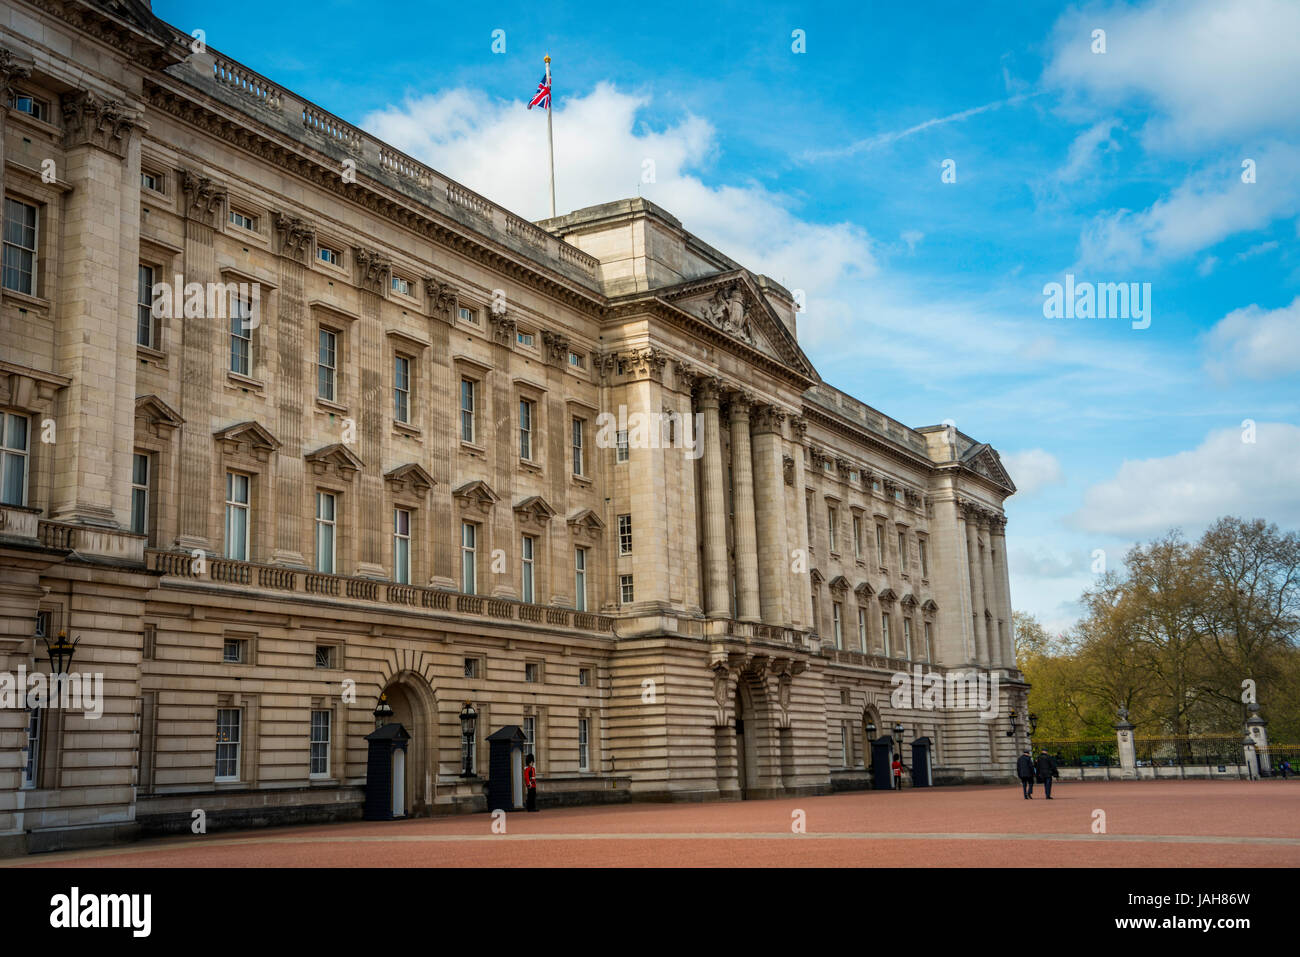 Buckingham Palace, Westminster, Londres, Angleterre, Royaume-Uni Banque D'Images